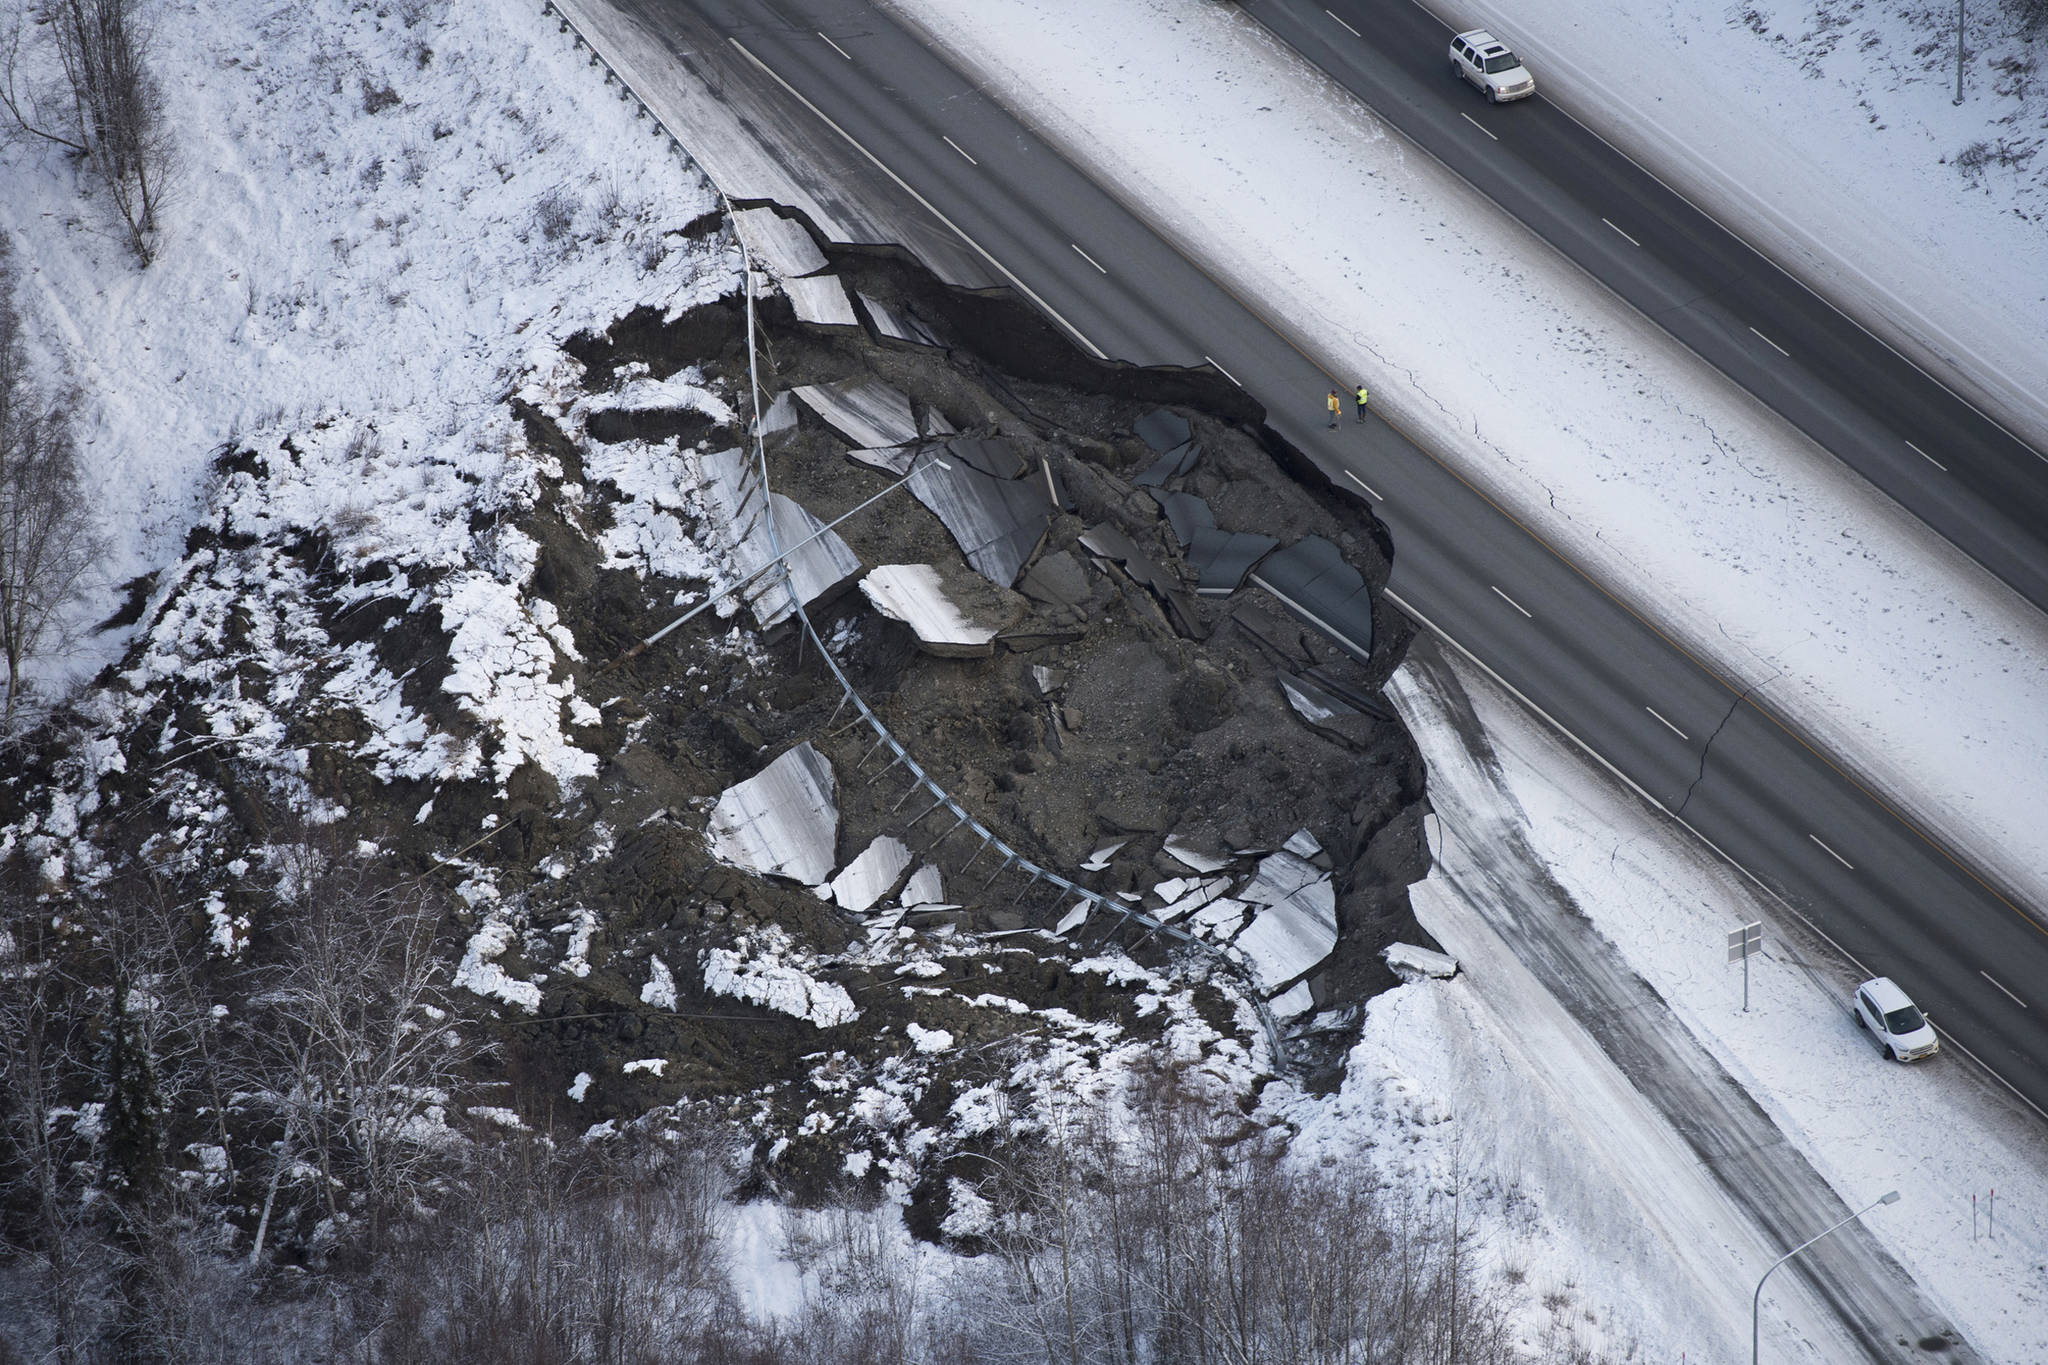 <span class="neFMT neFMT_PhotoCredit"><strong>Marc Lester | Anchorage Daily News</strong><strong></strong></span>                                <span class='IDappliedStyle' title='InDesign: Light'>This aerial photo shows damage at the Glenn Highway near Mirror Lake after earthquakes in the Anchorage area, Alaska, Friday, Nov. 30, 2018. Back-to-back earthquakes measuring 7.0 and 5.7 shattered highways and rocked buildings Friday in Anchorage and the surrounding area, sending people running into the streets and briefly triggering a tsunami warning for islands and coastal areas south of the city. (Marc Lester | Anchorage Daily News)</span>